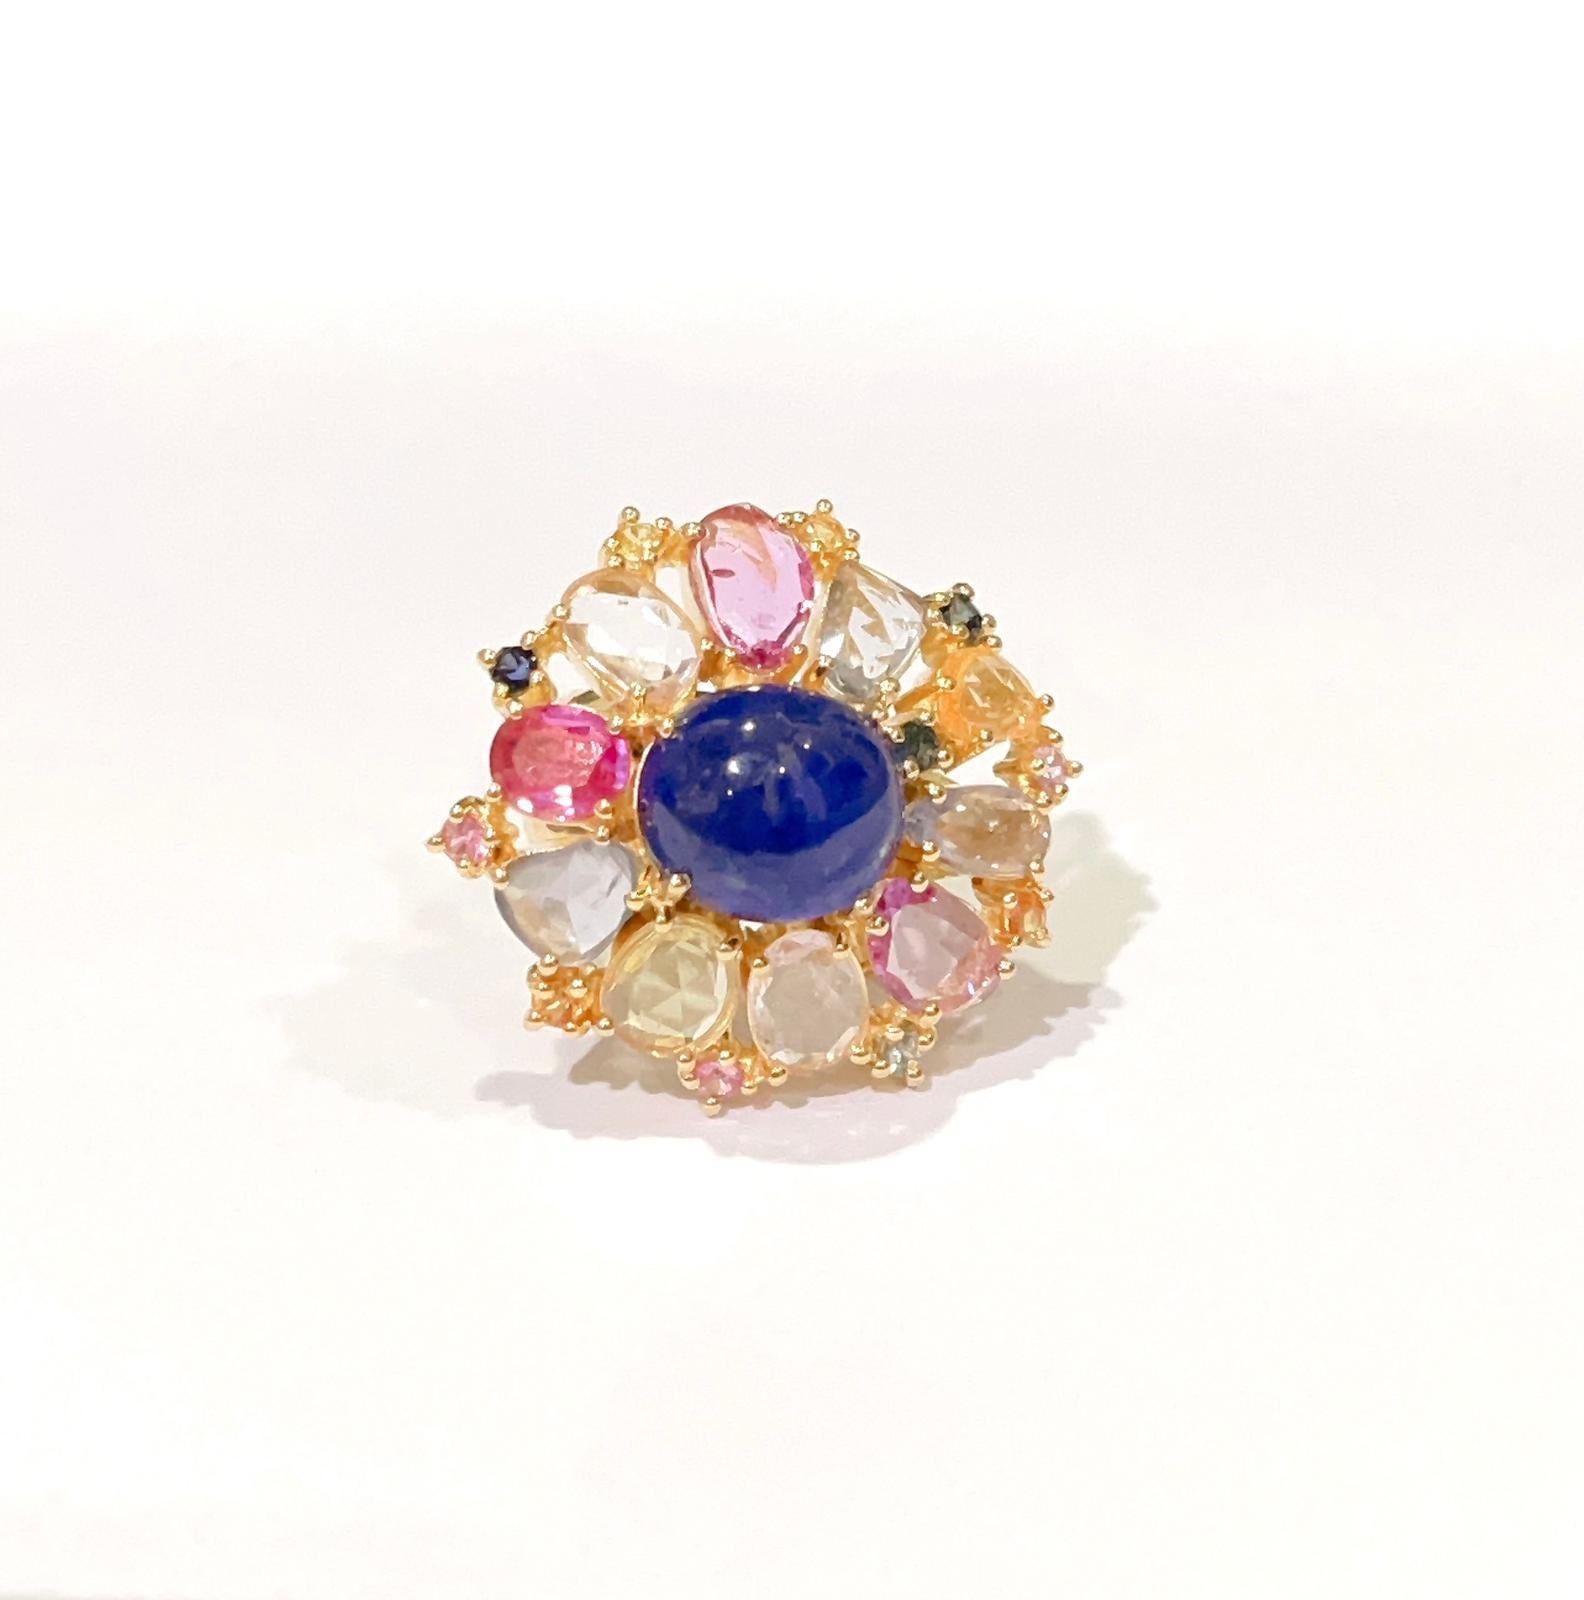 Bochic “Capri” Blue Sapphire, Ruby & Multi Color Rose Cut Sapphire Cocktail Ring Set In 22K Gold & Silver 
Multi natural gem Ring 
Beautiful Natural Blue Sapphire from Sri Lanka  - 12 carats
Set in the middle 
Round/Oval shape cabochon 
Natural